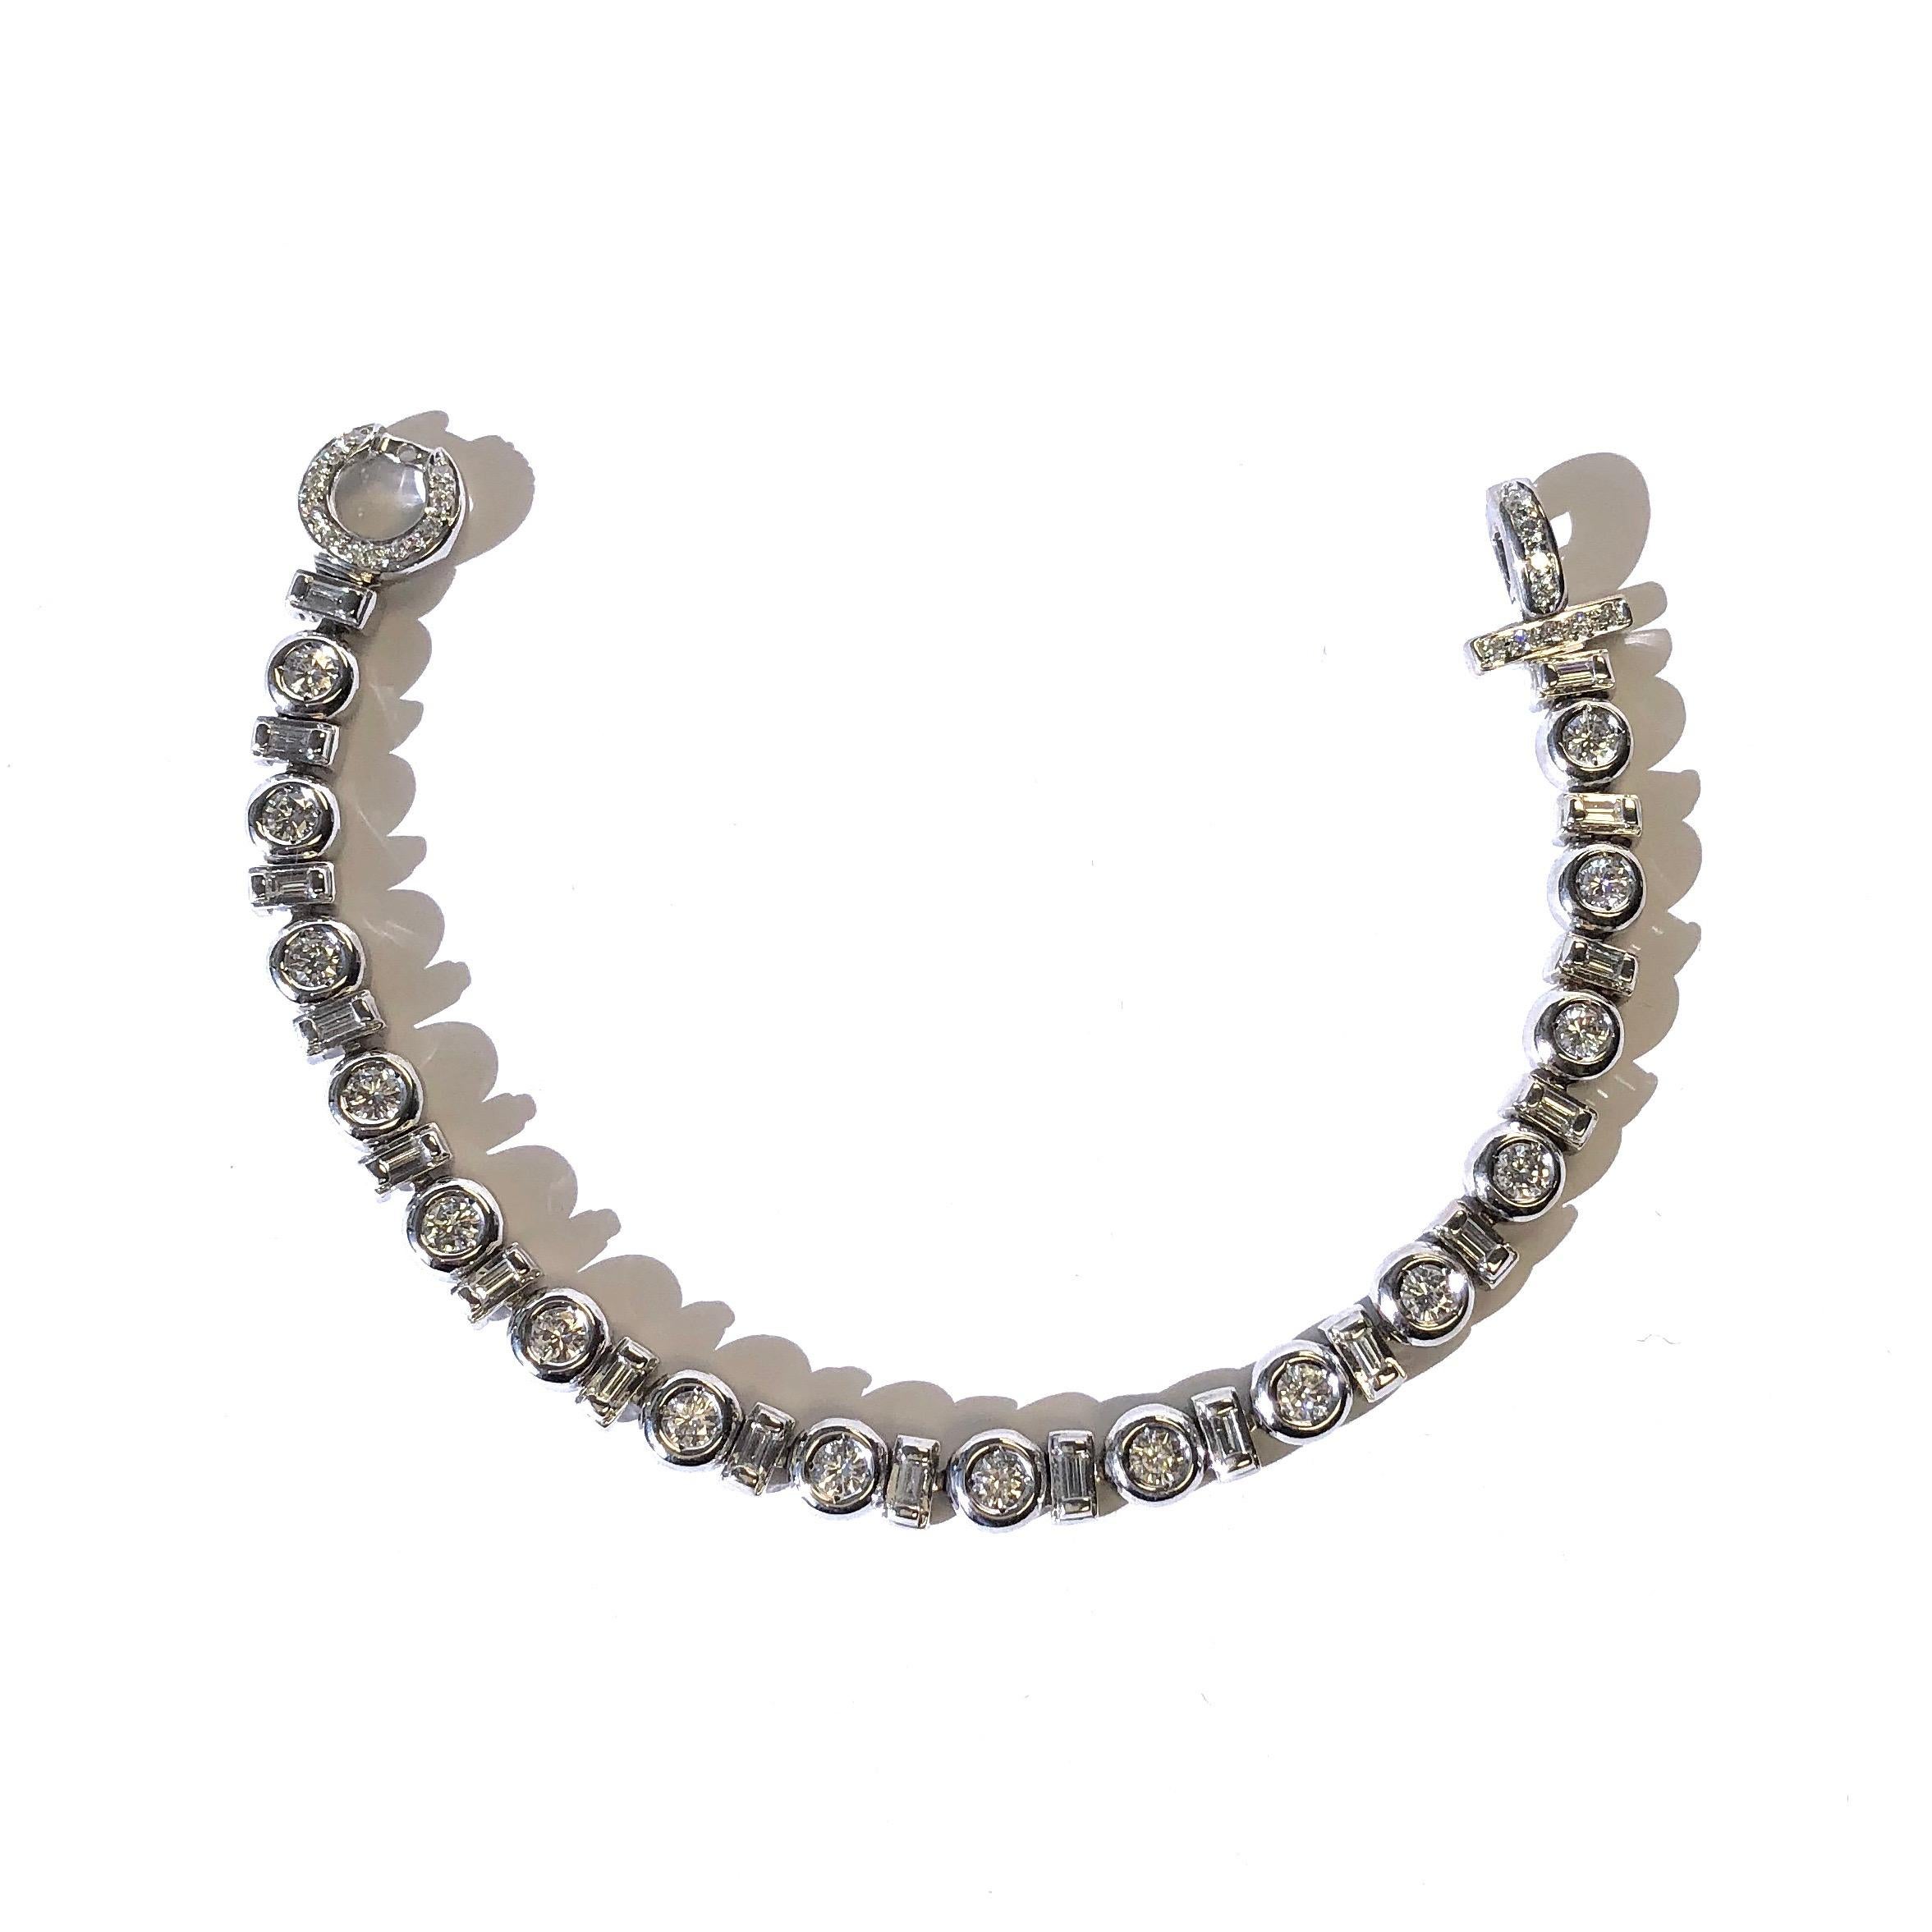 Crafted in 18K white gold, the bracelet is composed of a series of alternating bezel set round and baguette cut diamonds, Seven and one half inch length terminating in a diamond set fold over clasp. 
Approximate total diamond weight: 4.50ct. Color: